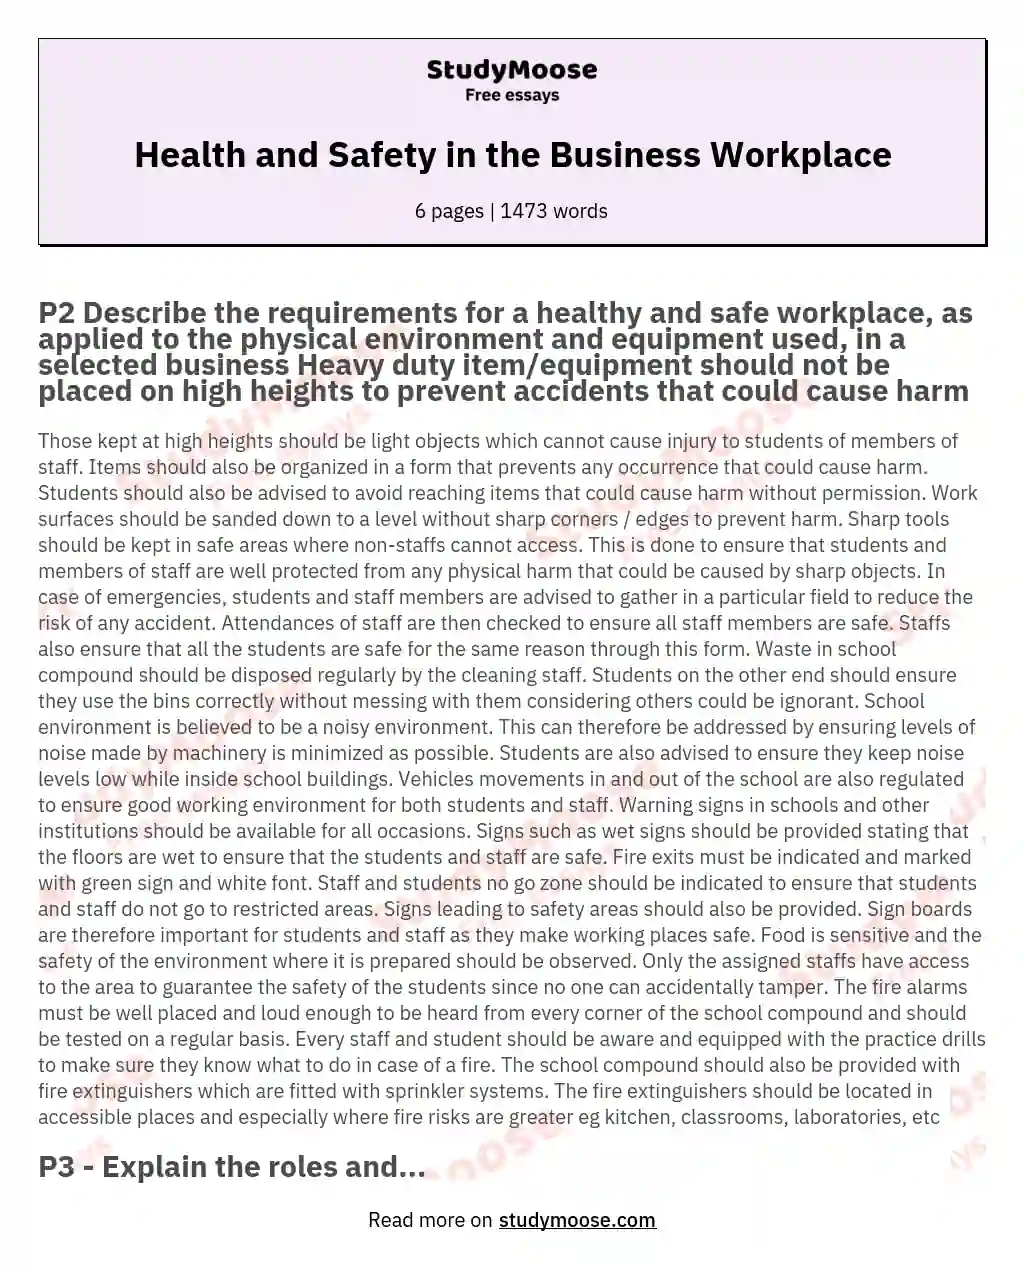 essay safety and health